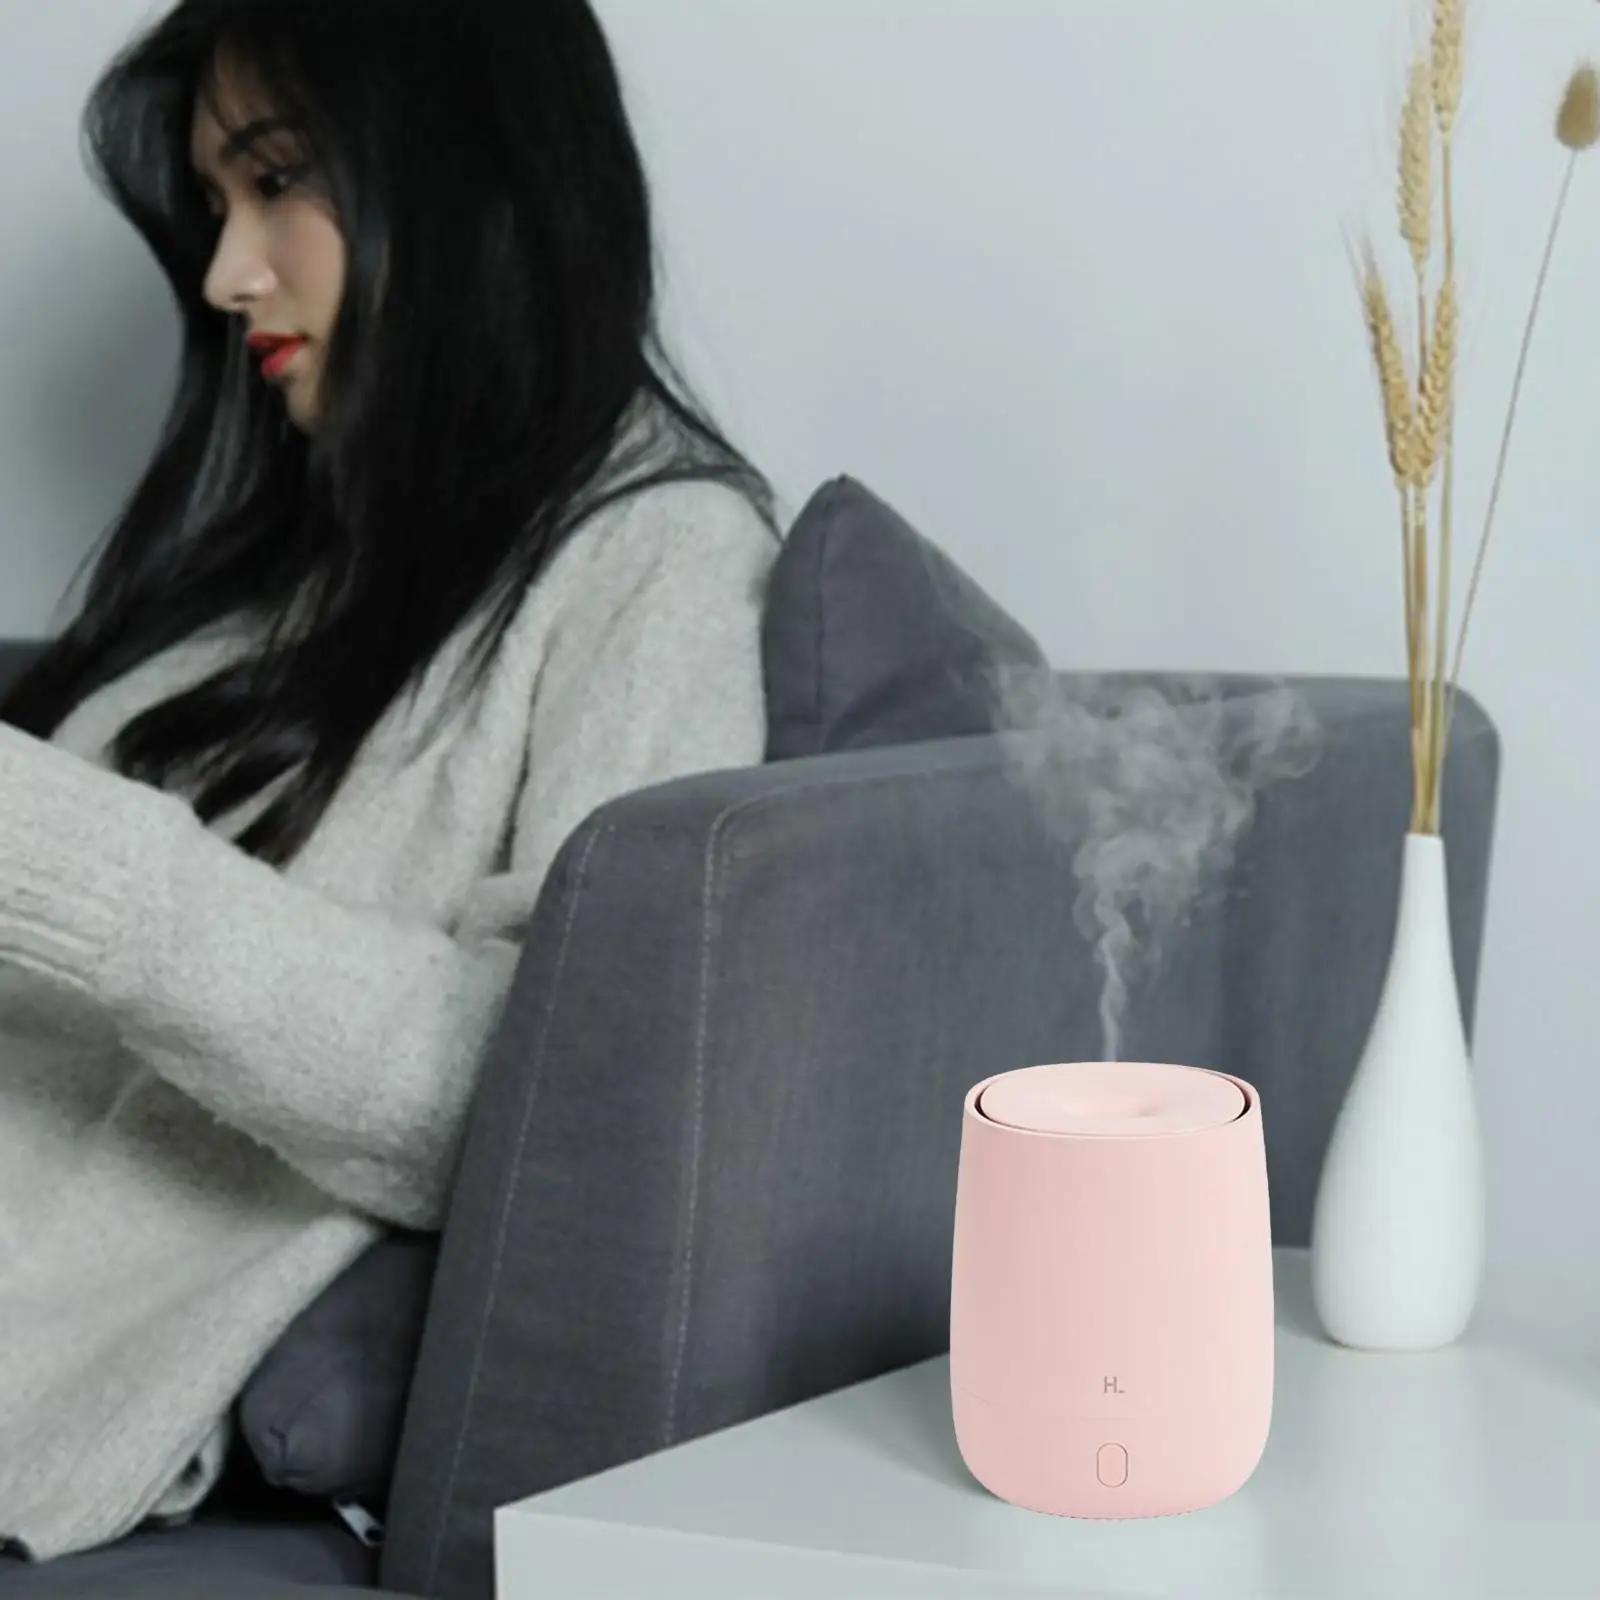 Electric Mini Ultrasonic Aroma Diffuser USB Essential Oil Diffuser LED Safety Night Light Scent for Desktop Bedroom Home SPA Car